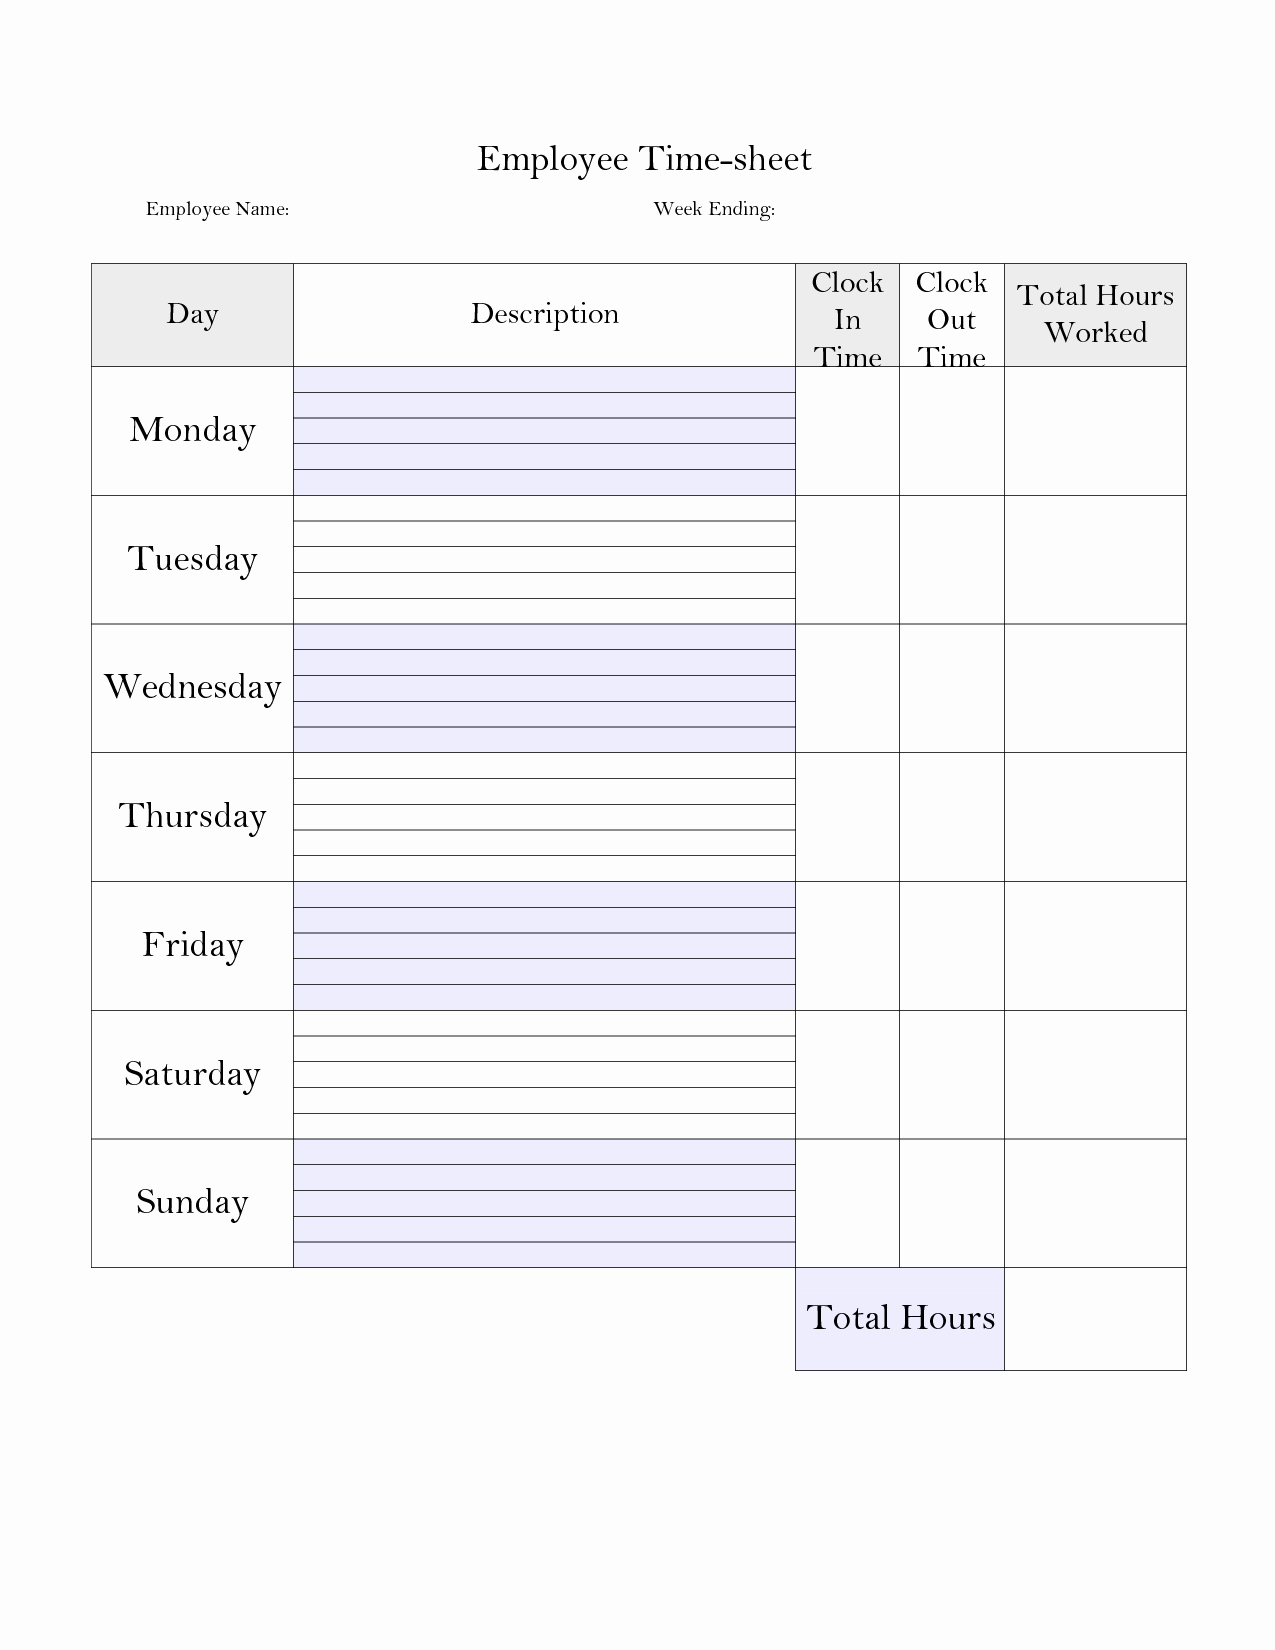 Weekly Time Card Template Inspirational Printable Weekly Employee Time Card Google Search